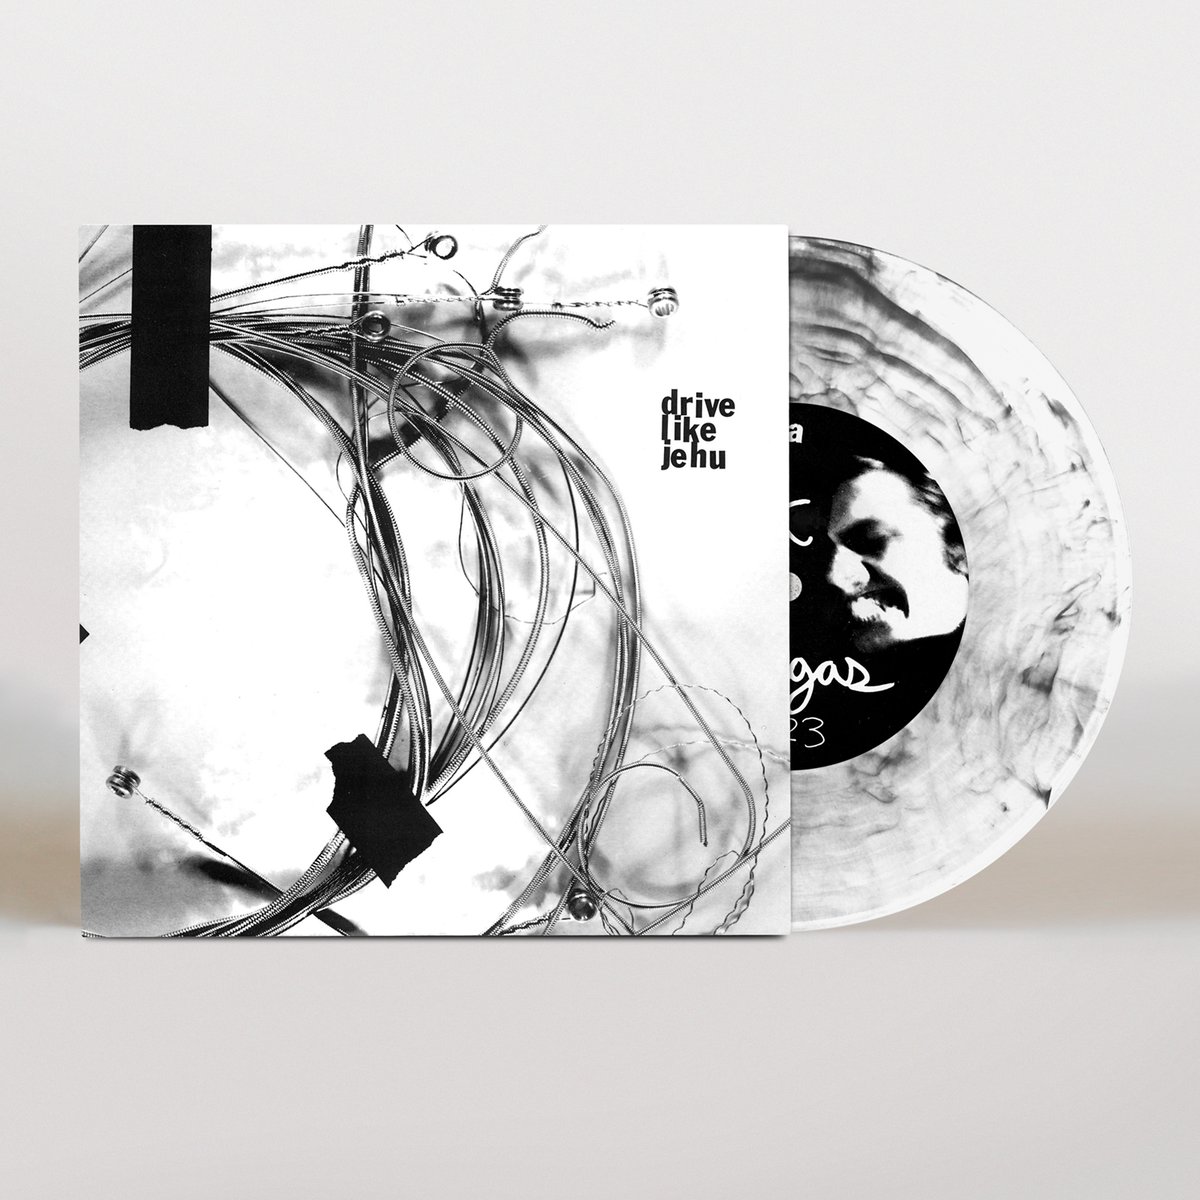 Pre-orders are live now--- Down In The Valley exclusive limited to 300 copies -- @DLJband 'Bullet Train To Vegas' 7' on white & black swirl vinyl. $8.99 One per customer, reserve your copy now.  Release date is this Friday 1/7. @mergerecords   downinthevalley.com/UPC/6738550023…